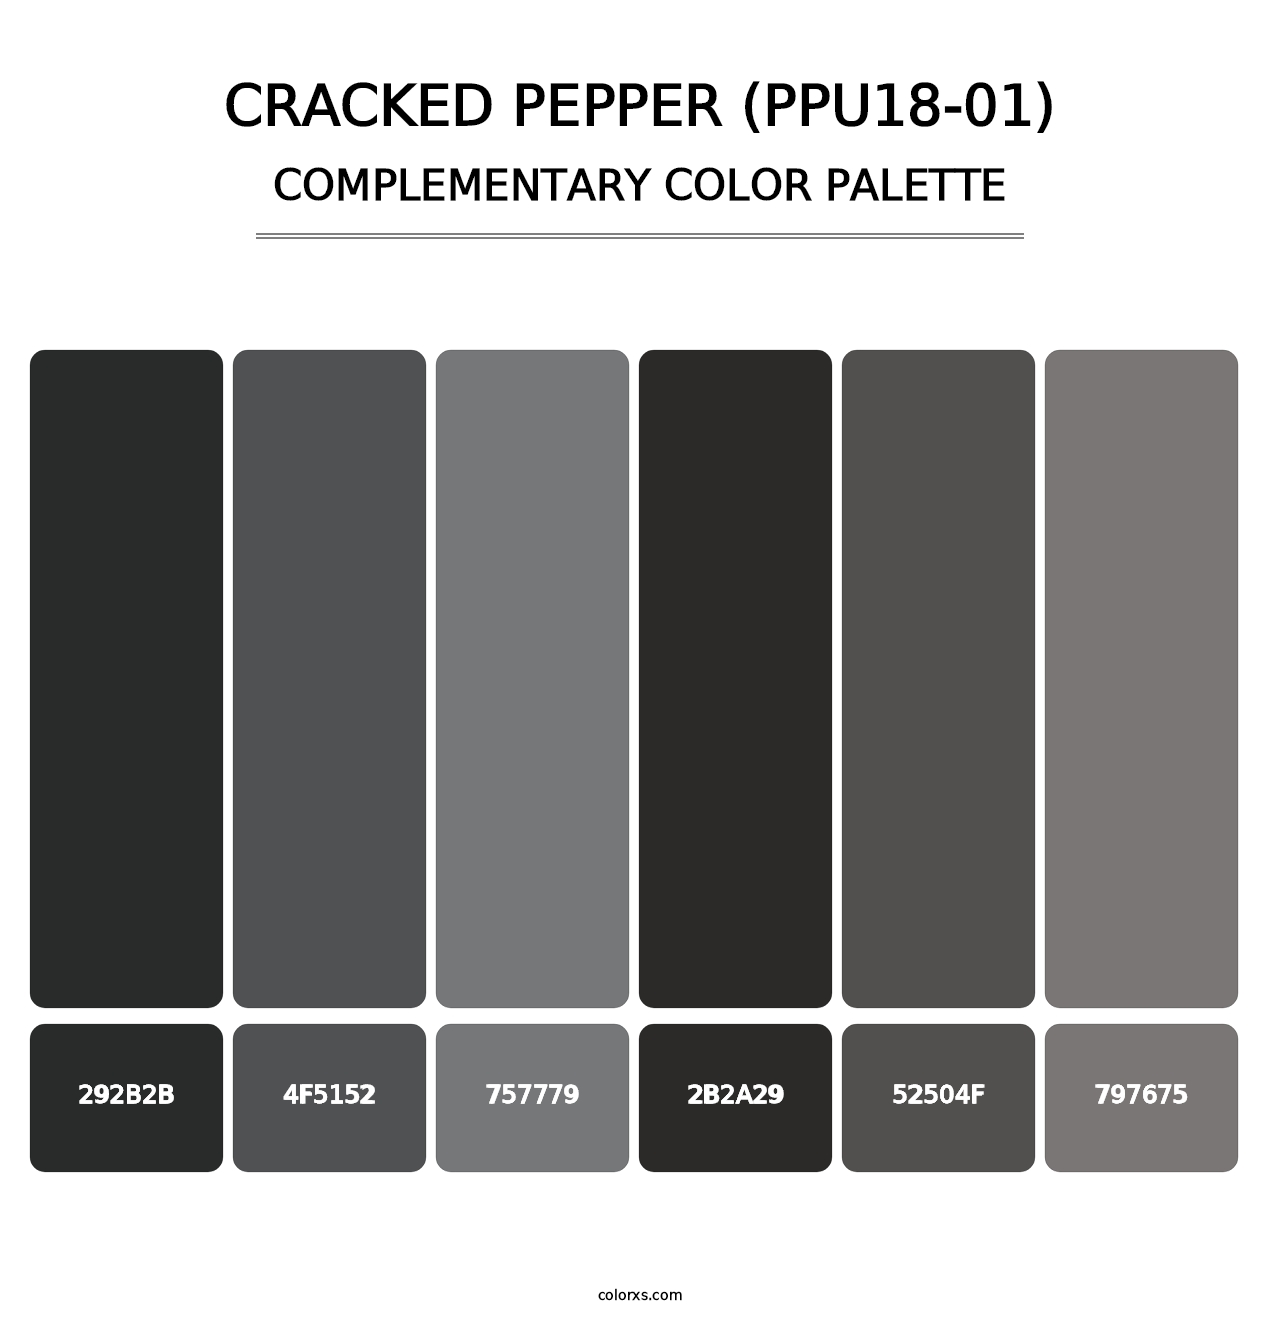 Cracked Pepper (PPU18-01) - Complementary Color Palette